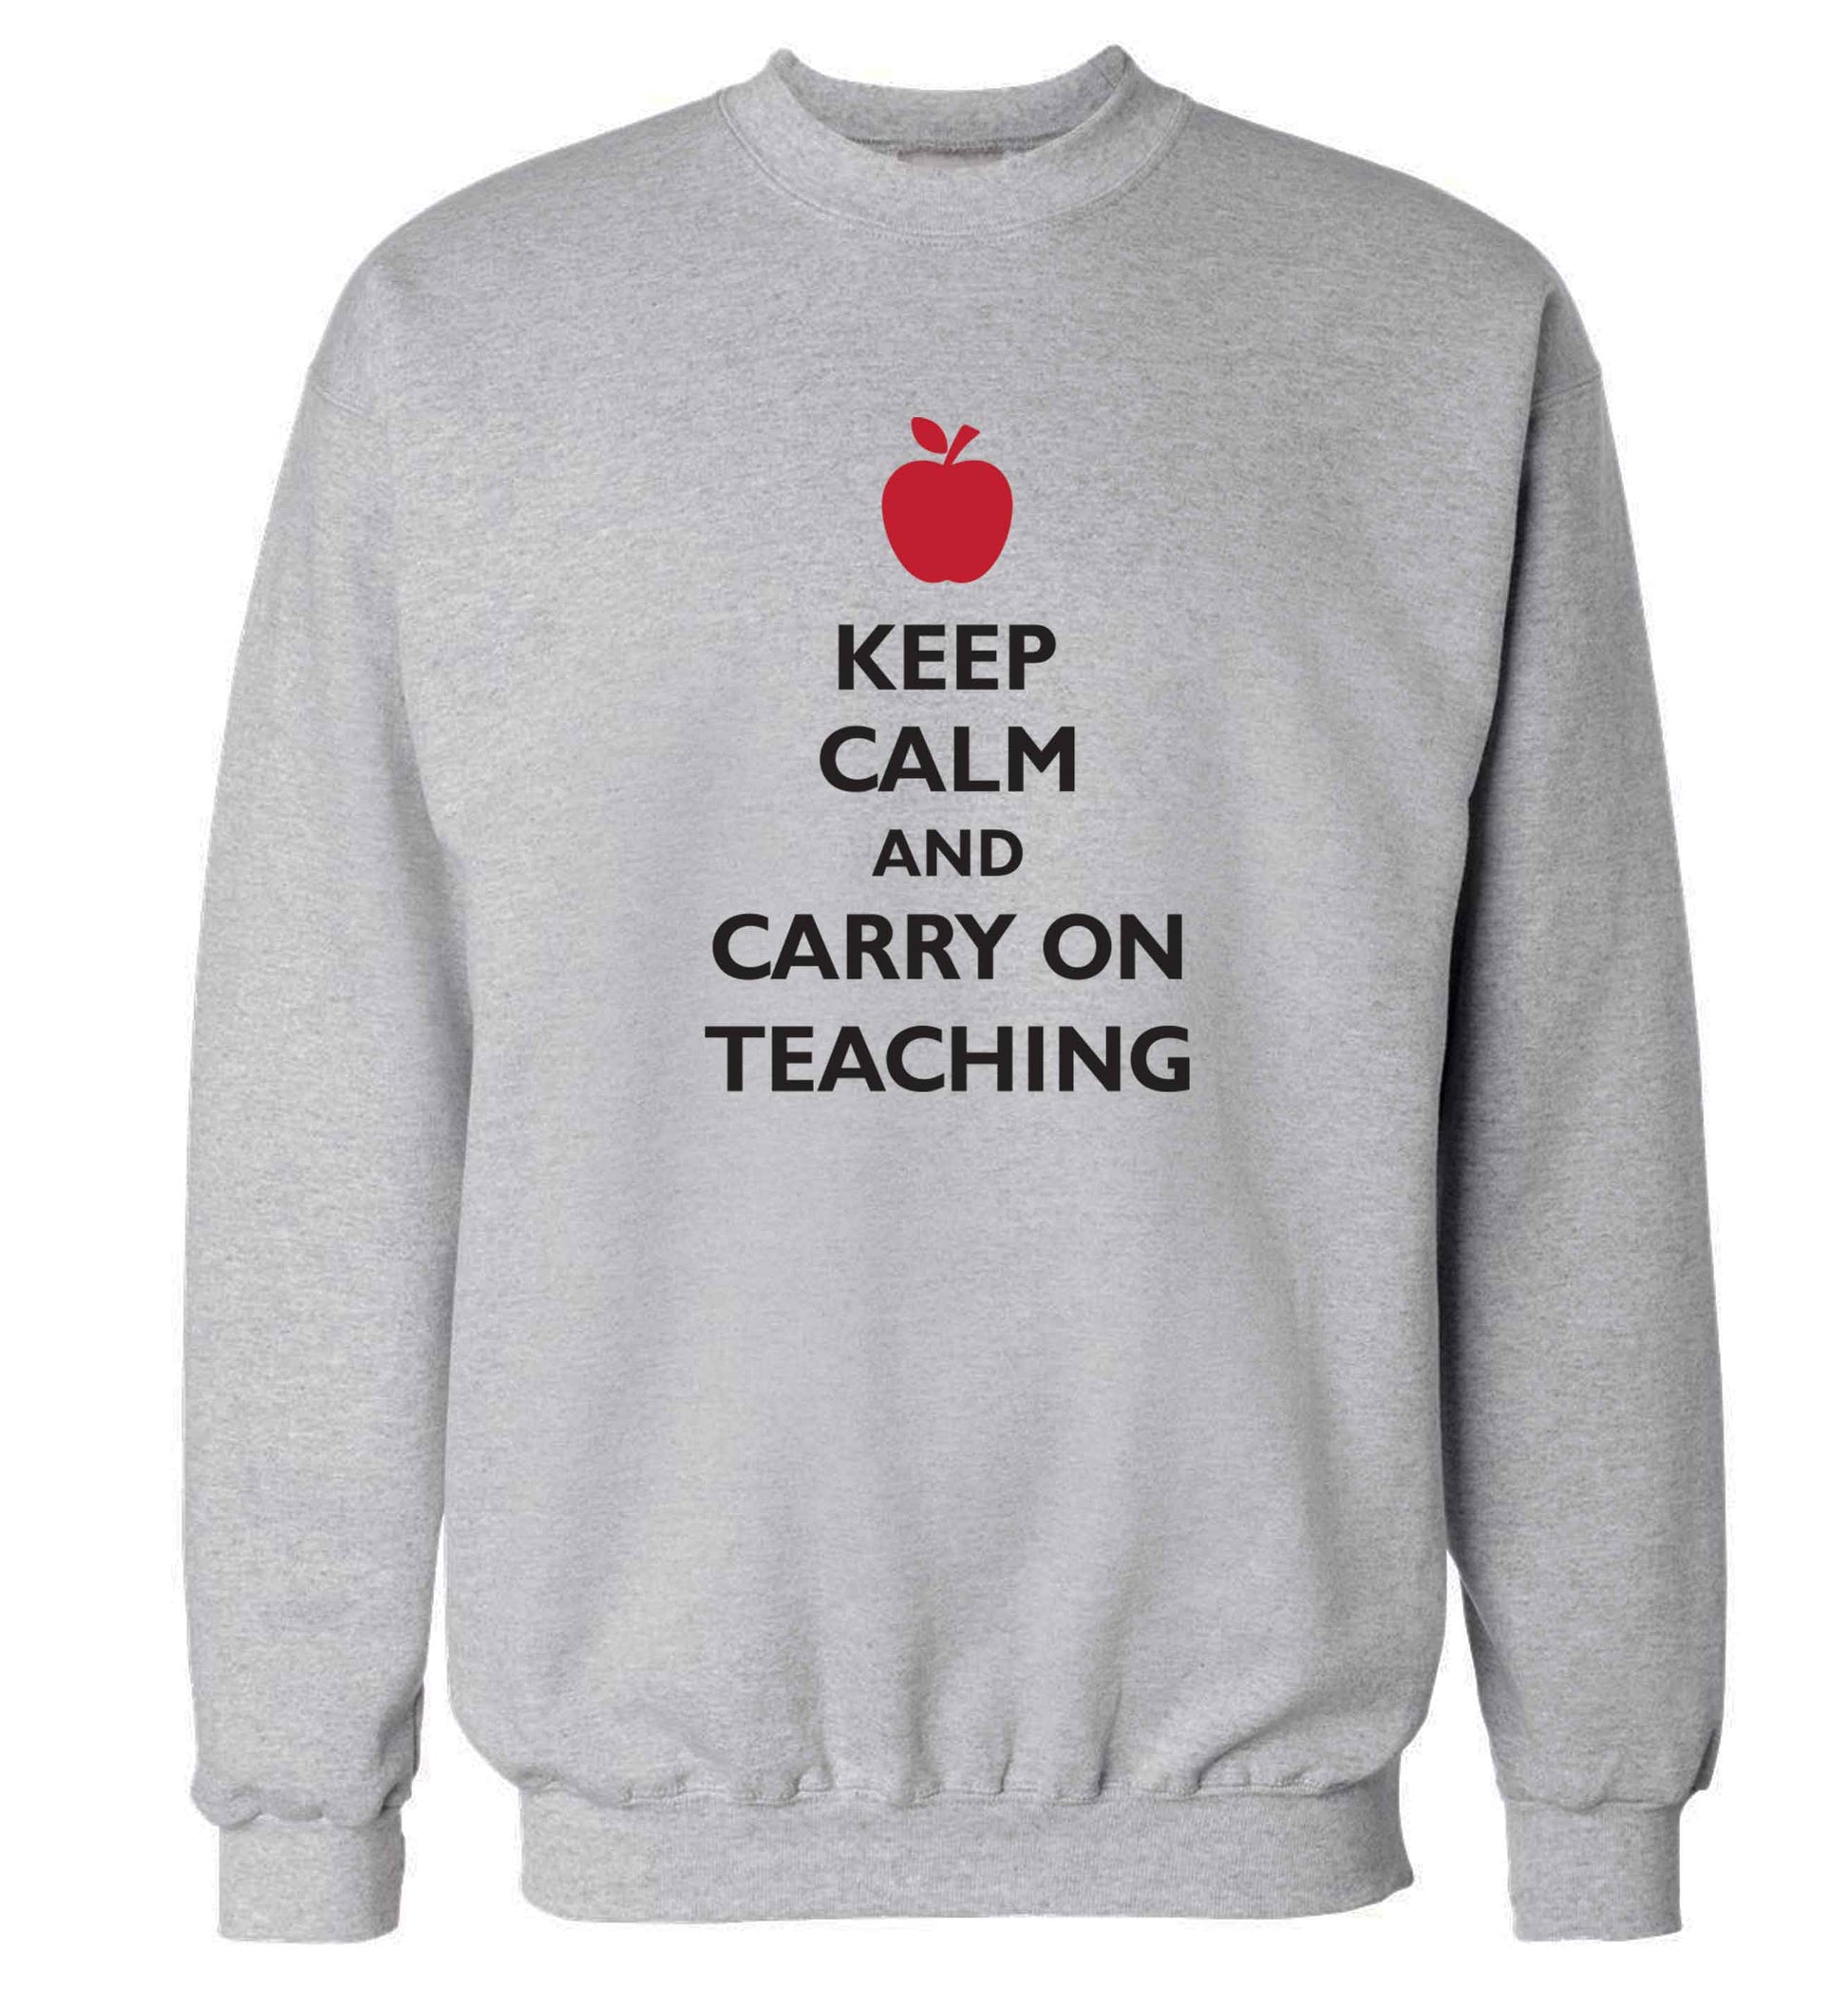 Keep calm and carry on teaching adult's unisex grey sweater 2XL